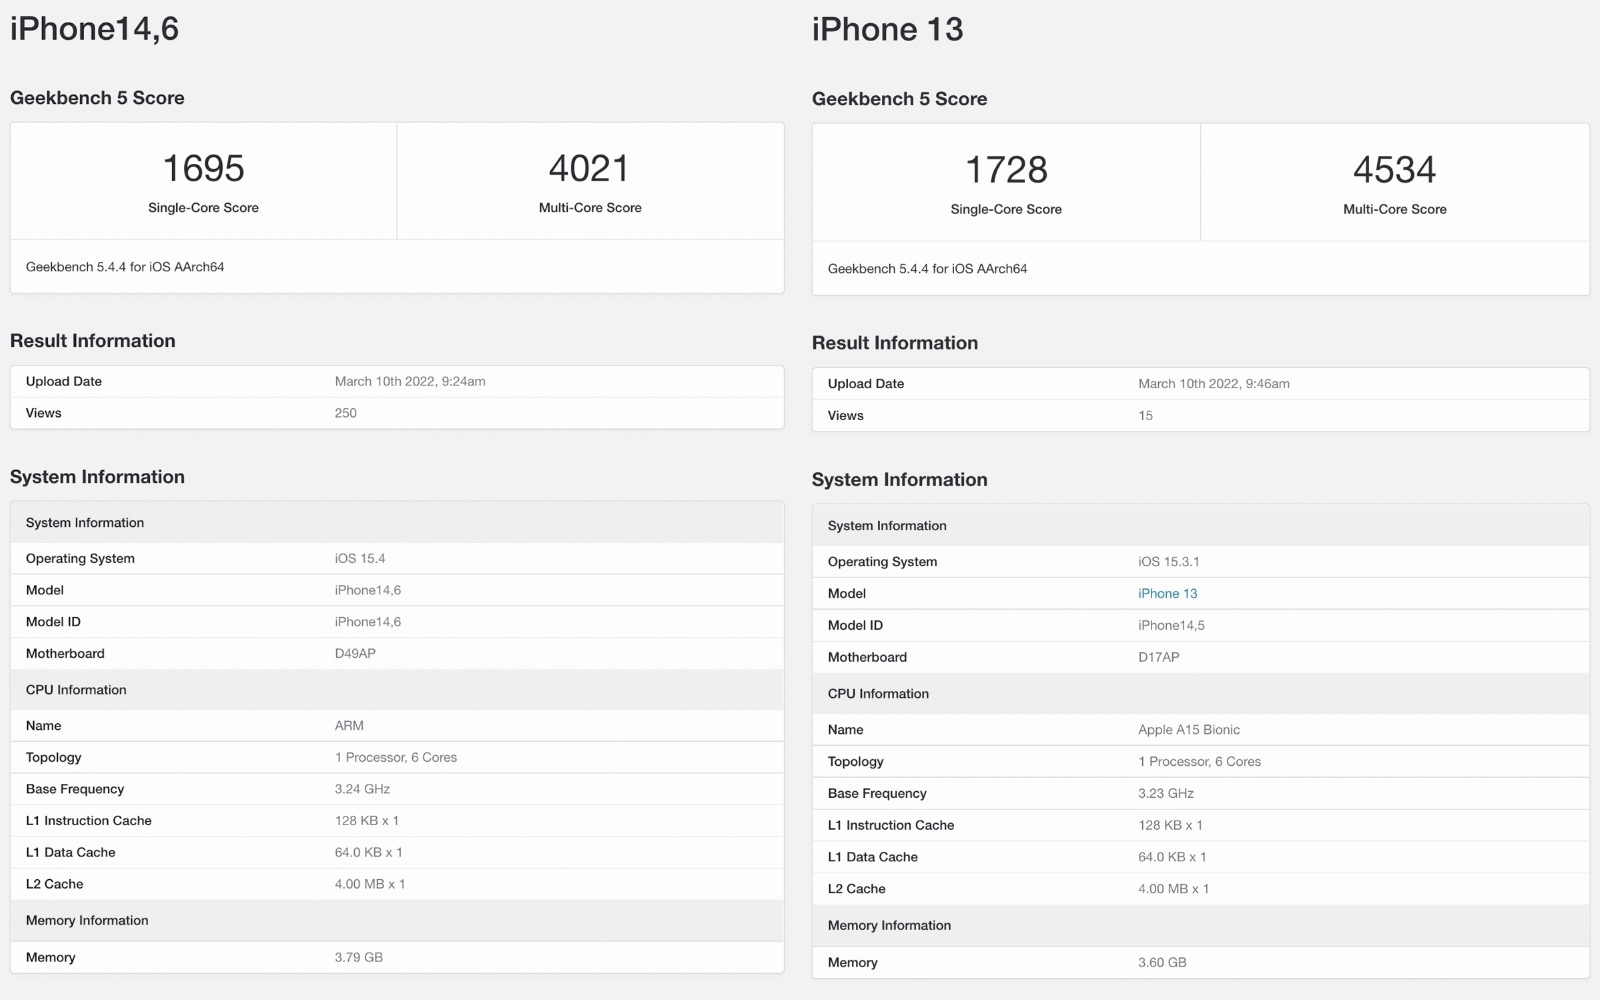 iphone-13-and-iphonese3-benchmark-scores.jpg